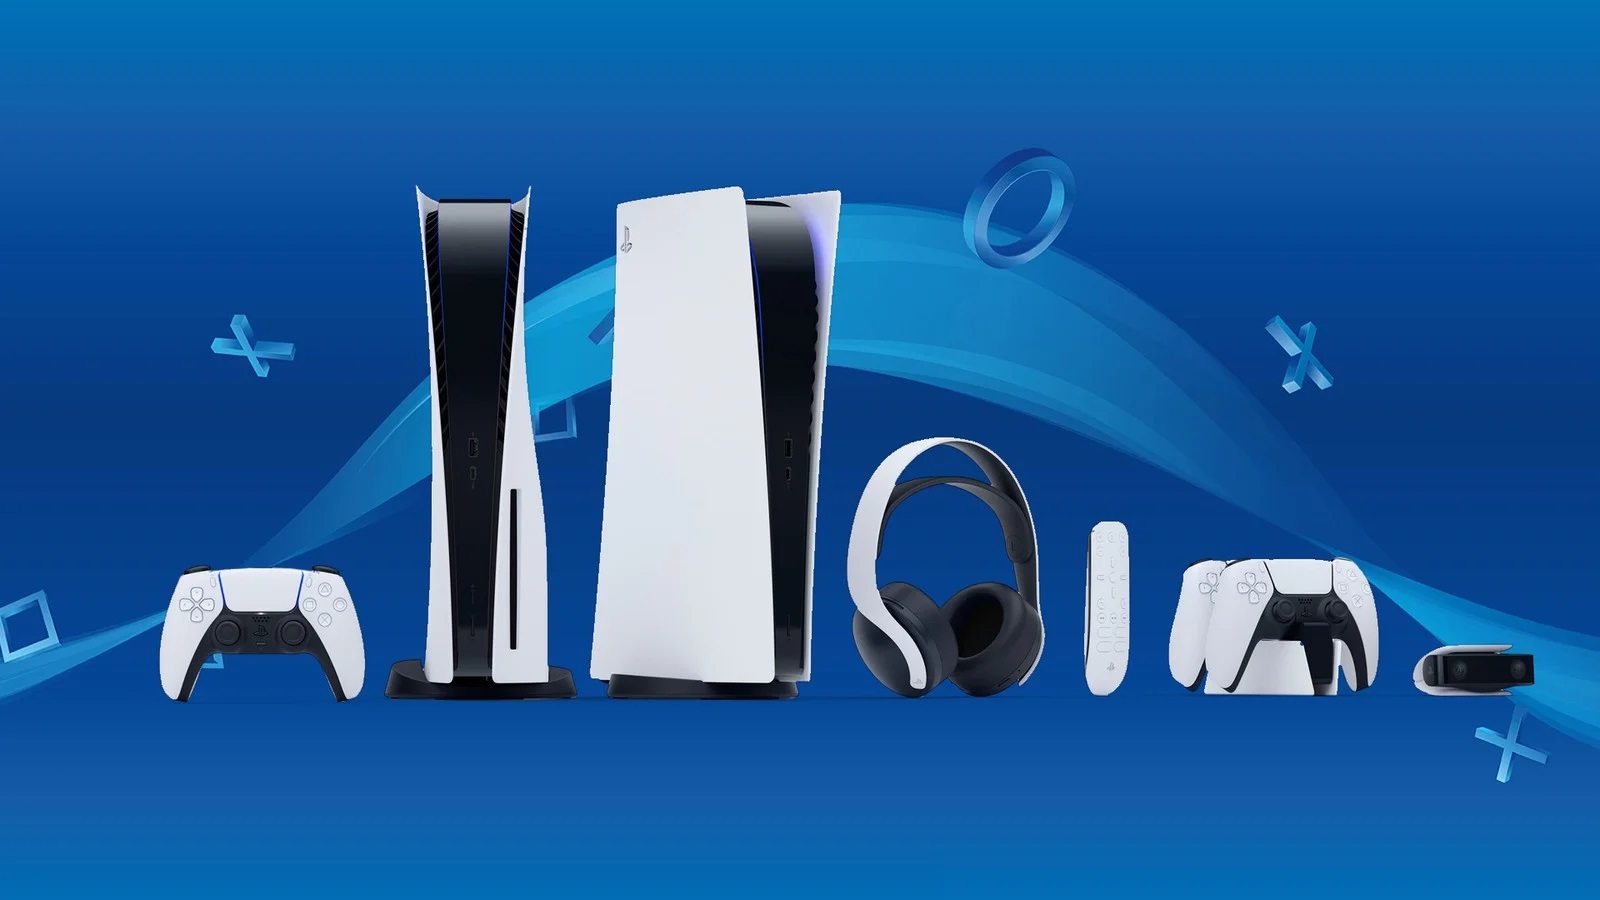 PlayStation 5 all Official Accessories